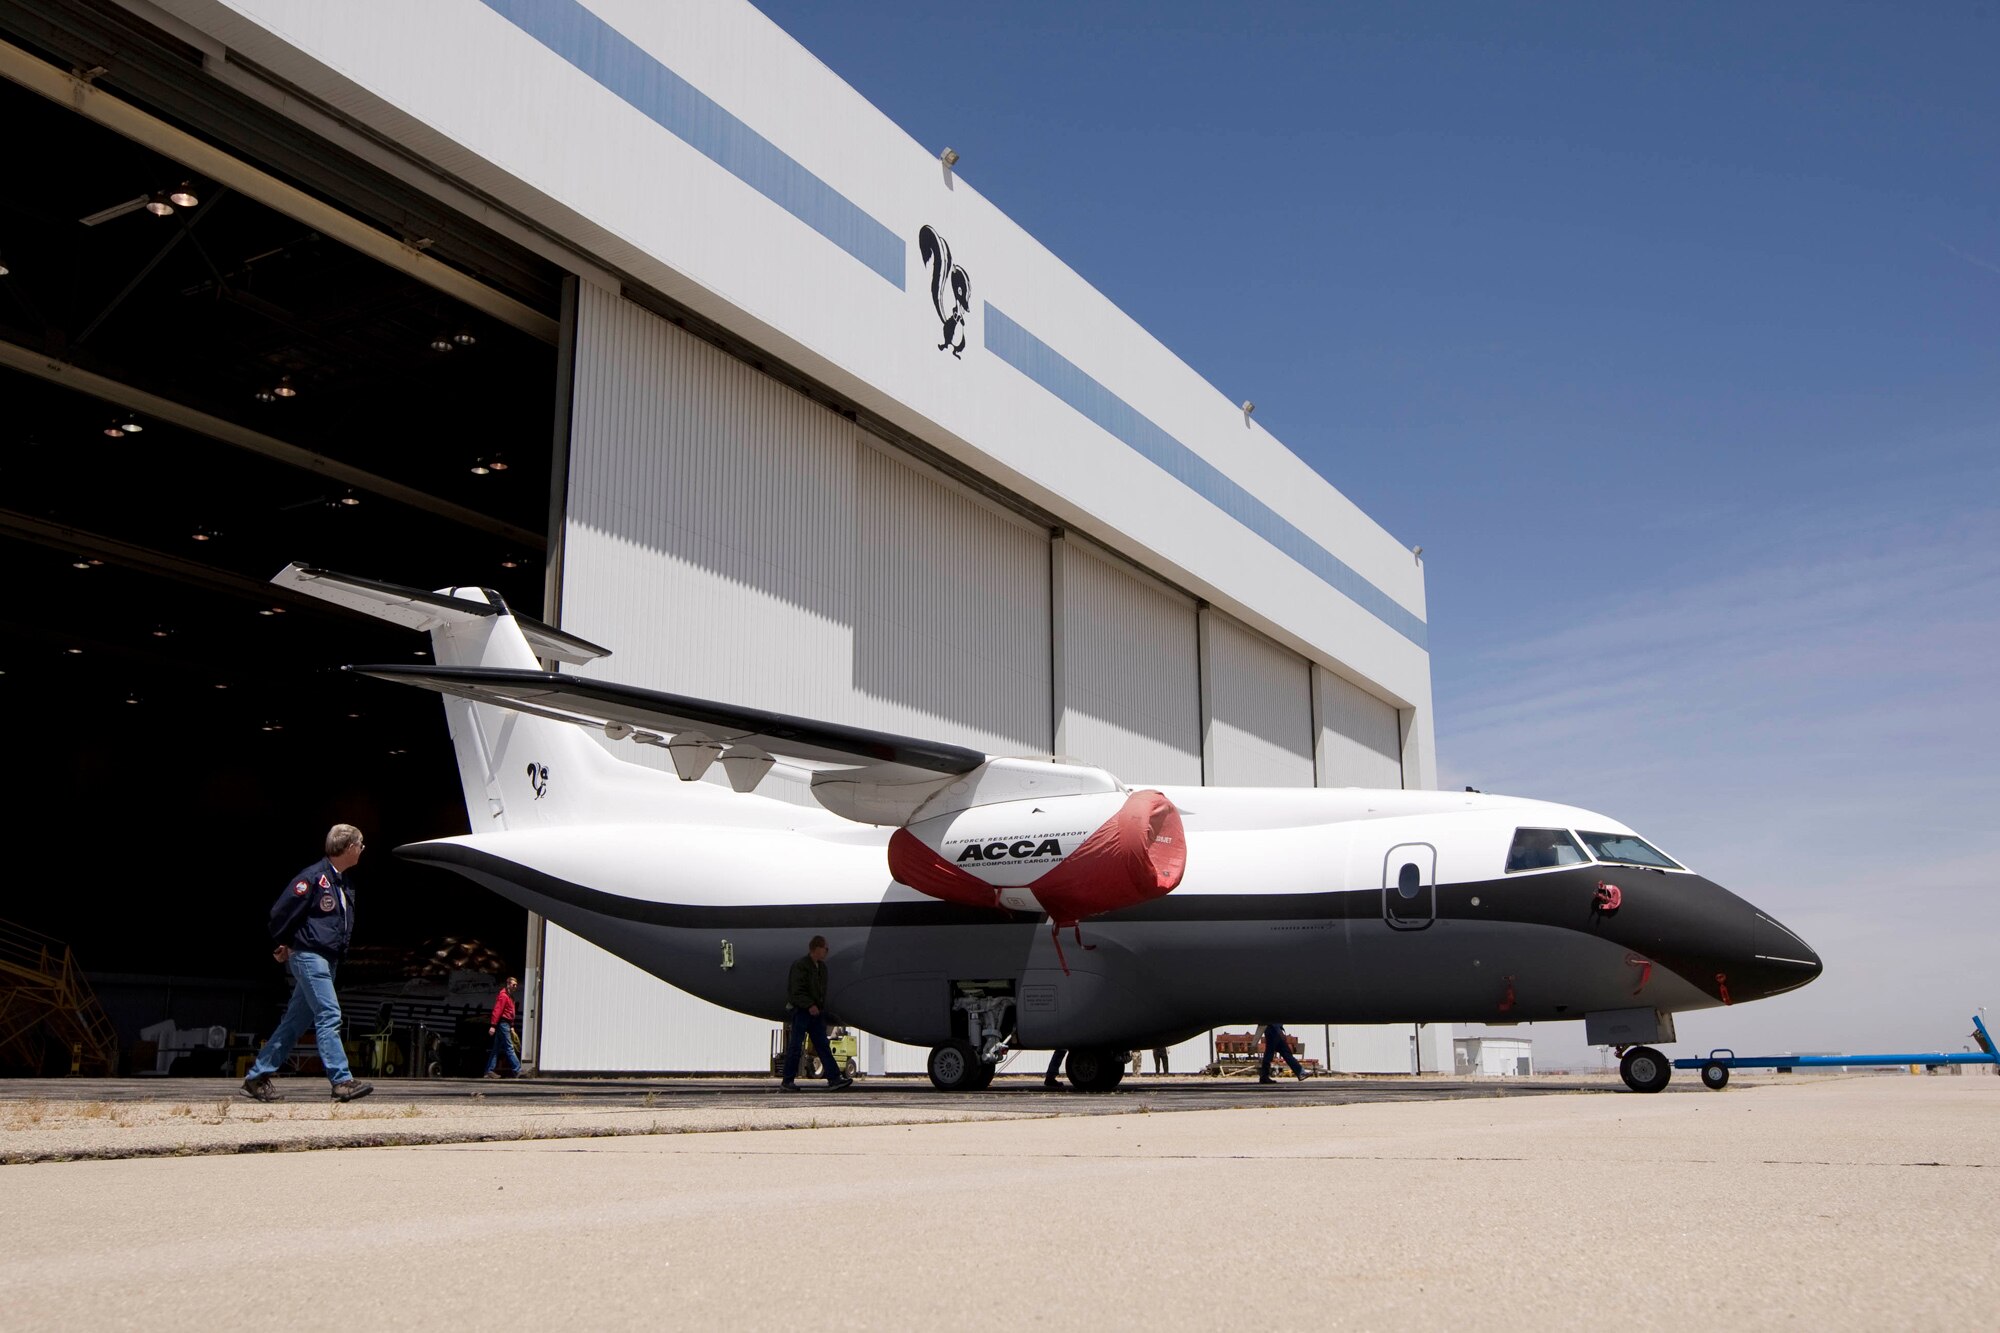 The Advanced Composite Cargo Aircraft is rolled out of a hangar in May 2009 at Lockheed Martin's Skunk Works, U.S. Air Force Plant 42 in Palmdale, Calif. The ACCA is a modified Dornier 328J aircraft.  The fuselage aft of the crew station and the vertical tail were removed and replaced with completely new structural designs made of advanced composite materials fabricated using out-of-autoclave curing.  Air Force Research Laboratory at Wright-Patterson Air Force Base, Ohio oversees the ACCA program. (Lockheed Martin photo)